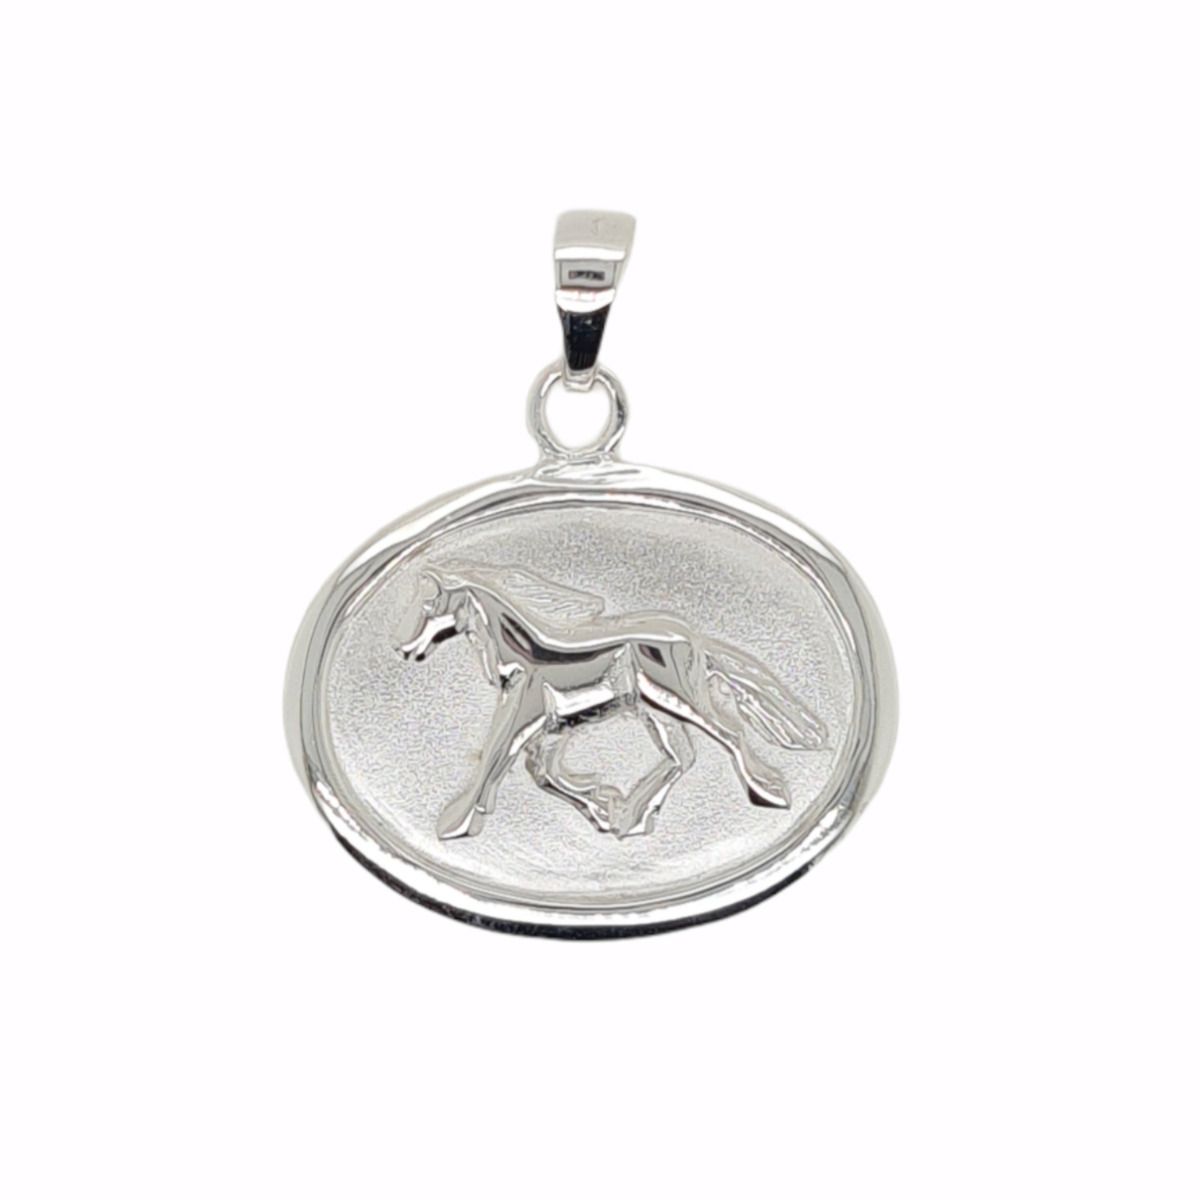 Pendant Sterling Silver Oval Horse